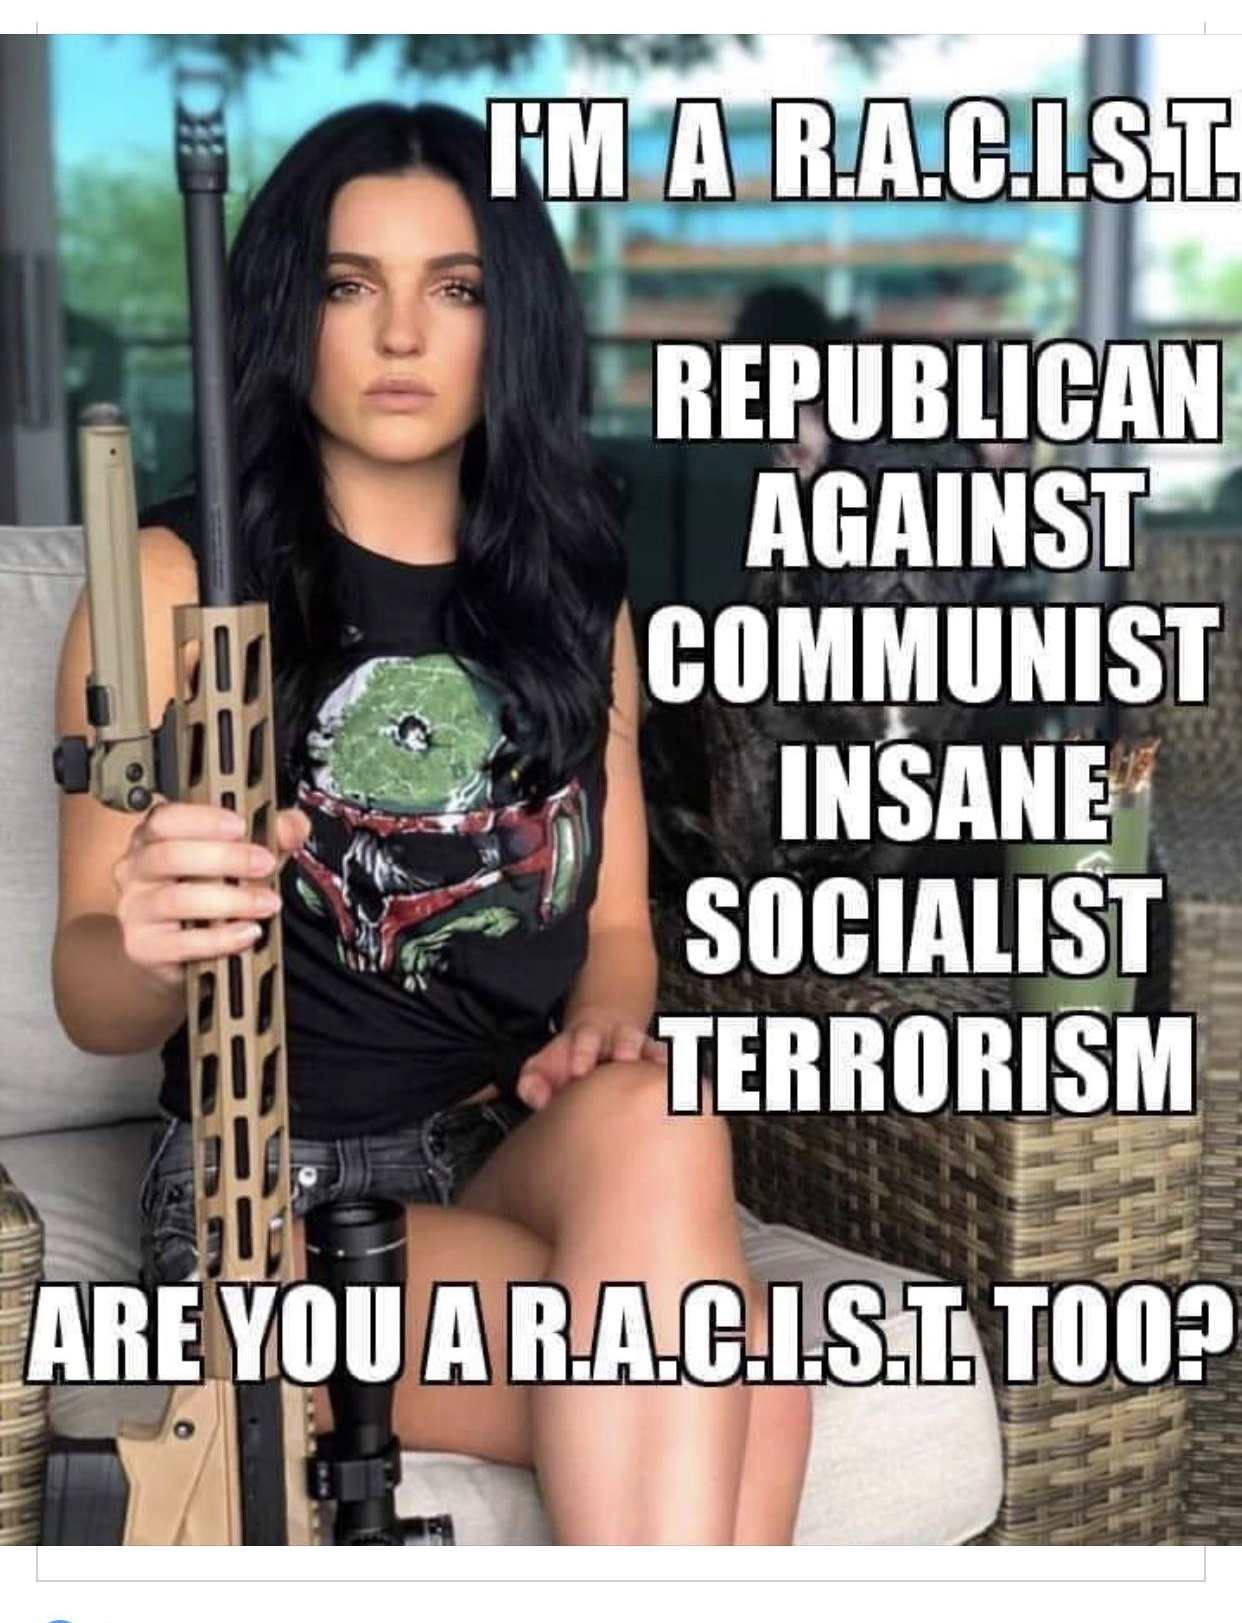 I'm A R.A.C.I.S.T. Republican Against Communist Insane Socialist Terrorism Are You A R.A.C.I.S.T Too?